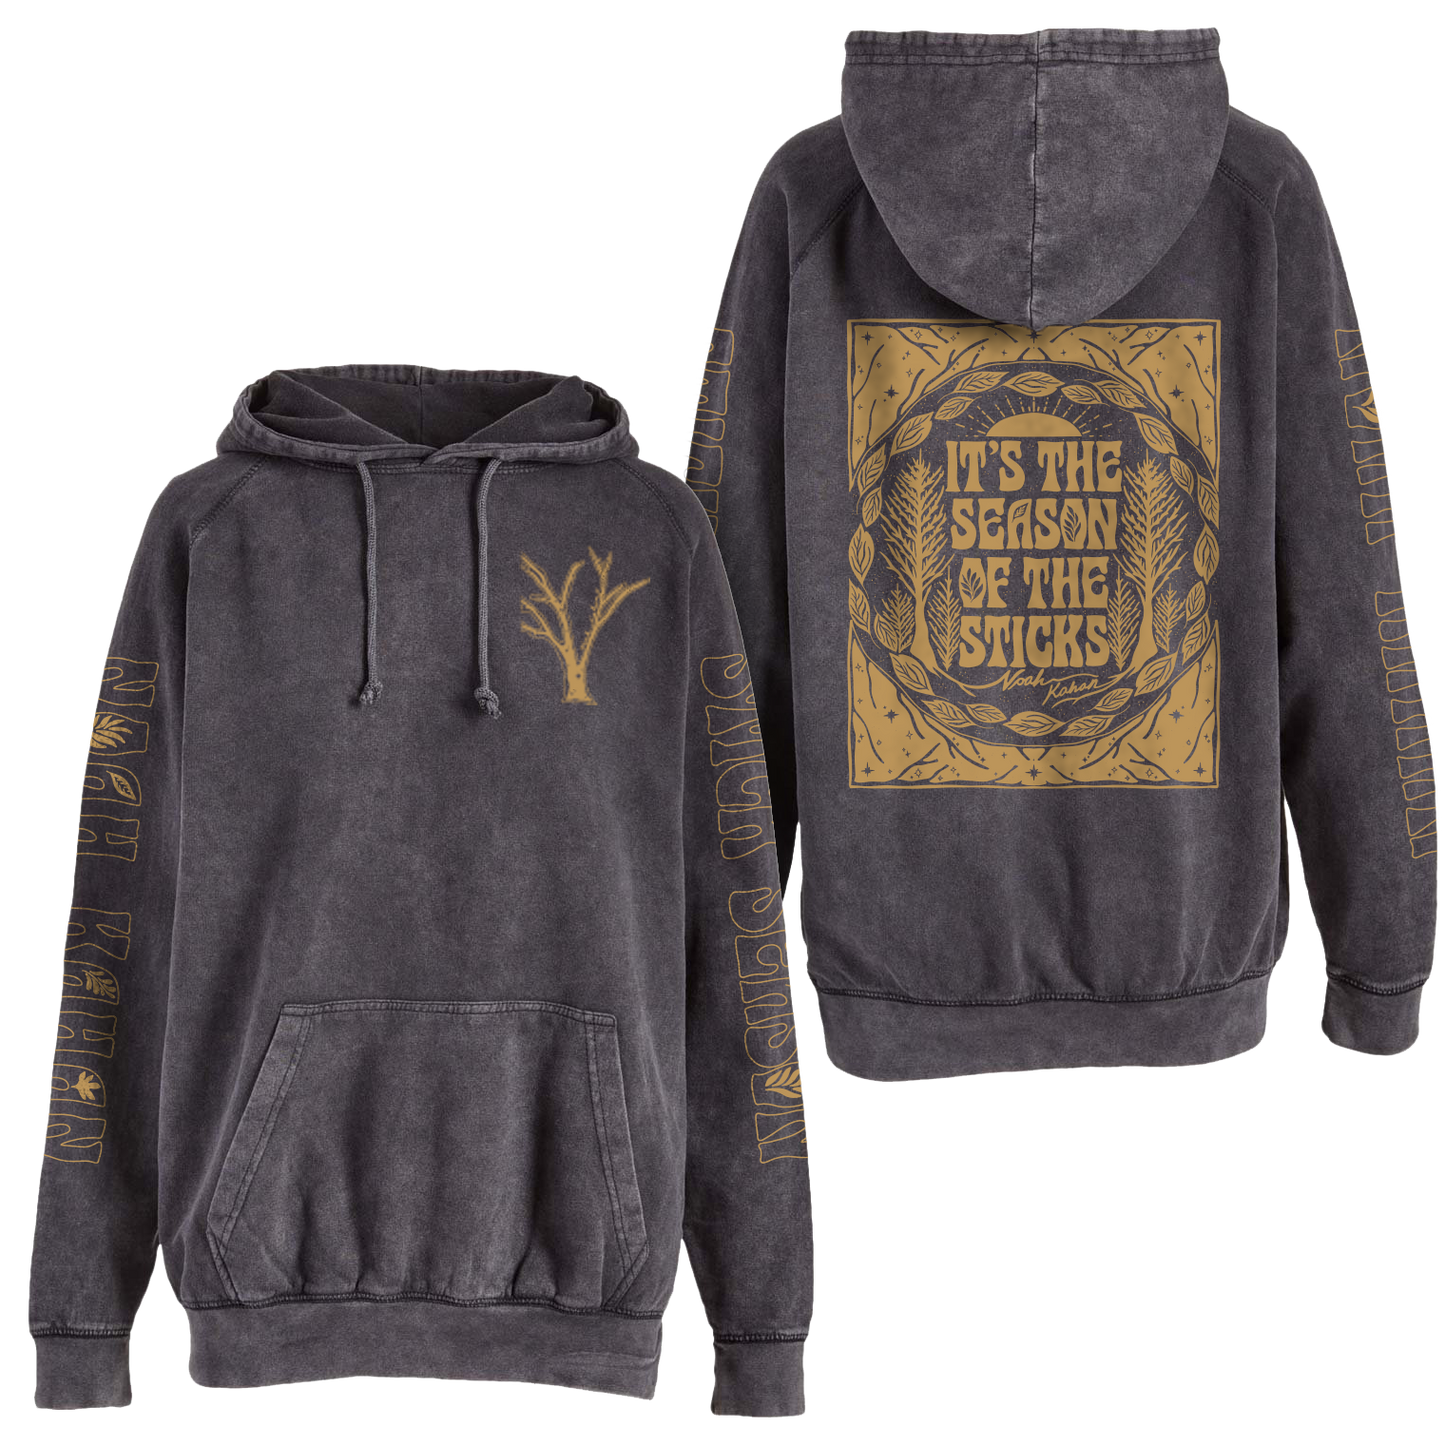 the official Noah Kahan Stick Season Hoodie in vintage black mineral wash. "It's the season of the sticks" on the back, tree branches on front, and full length prints on each sleeve, all in gold metallic ink. 